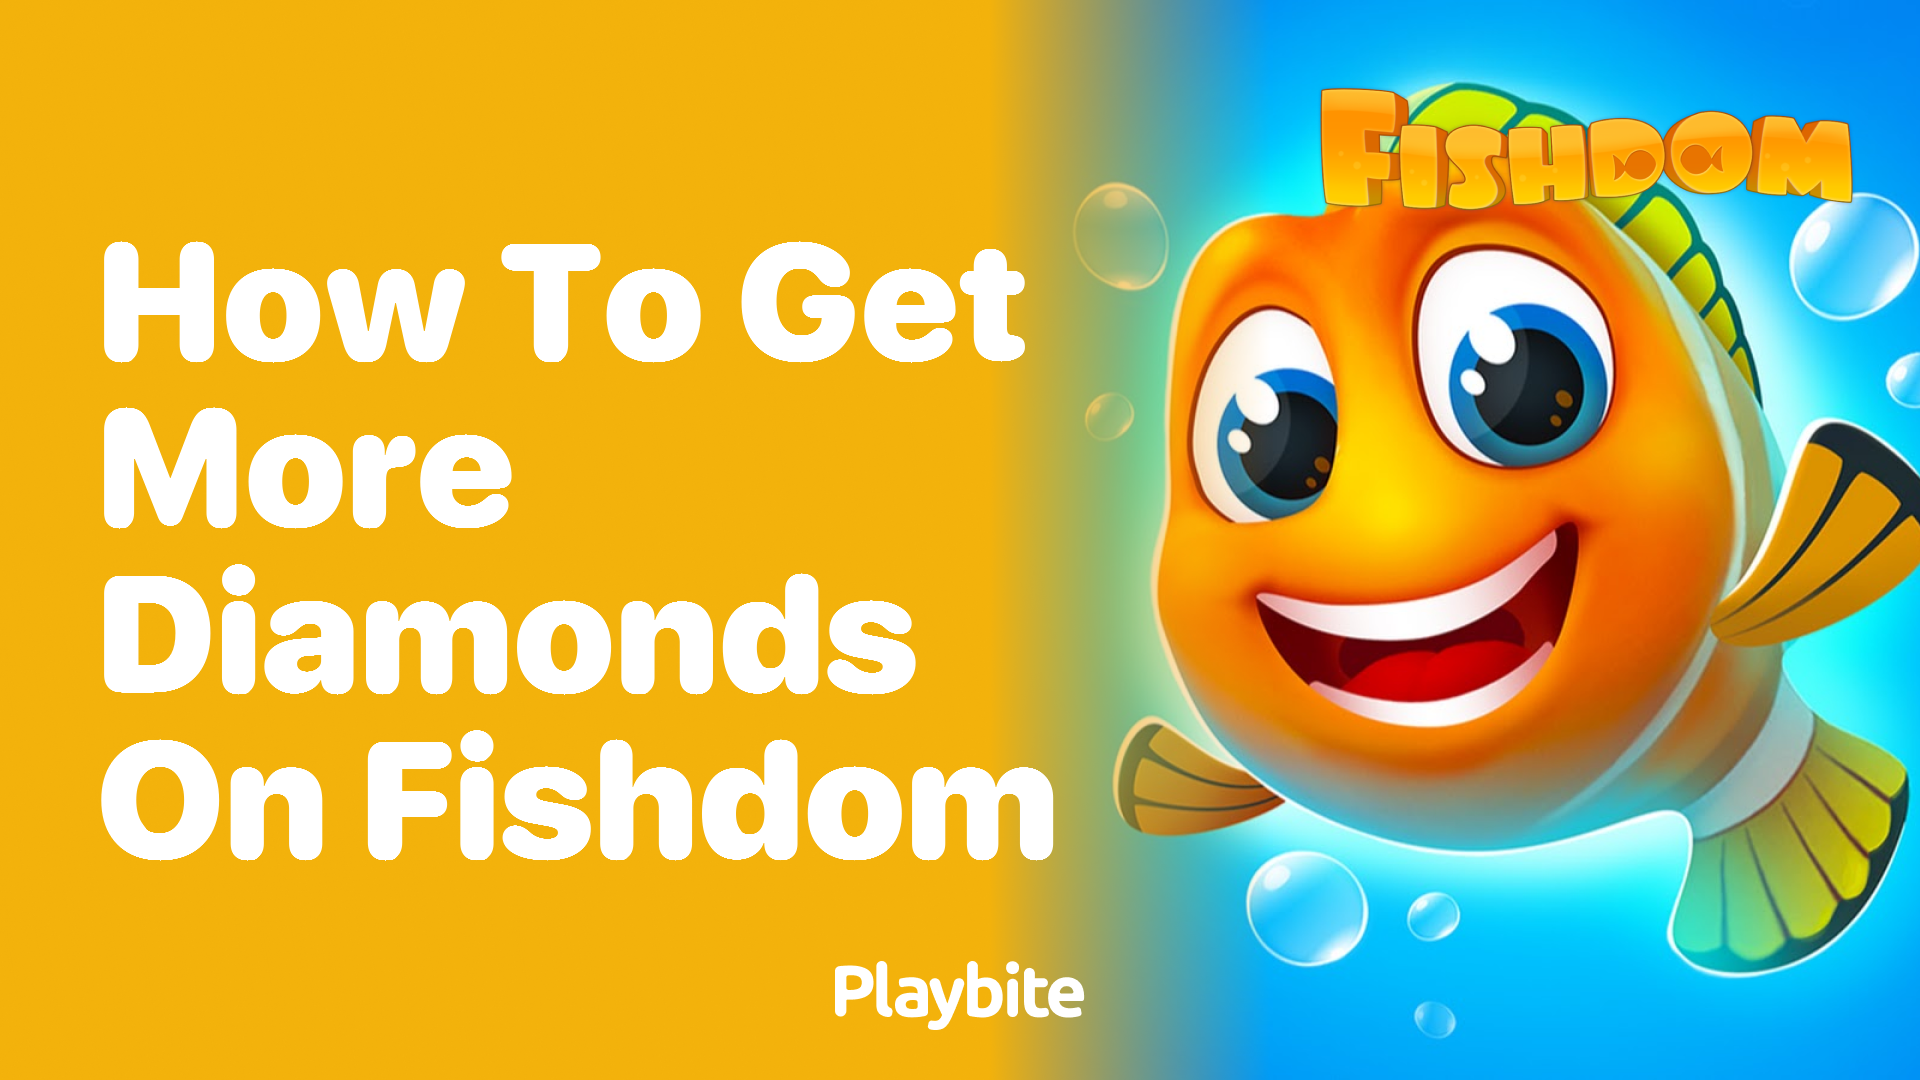 How to Get More Diamonds on Fishdom